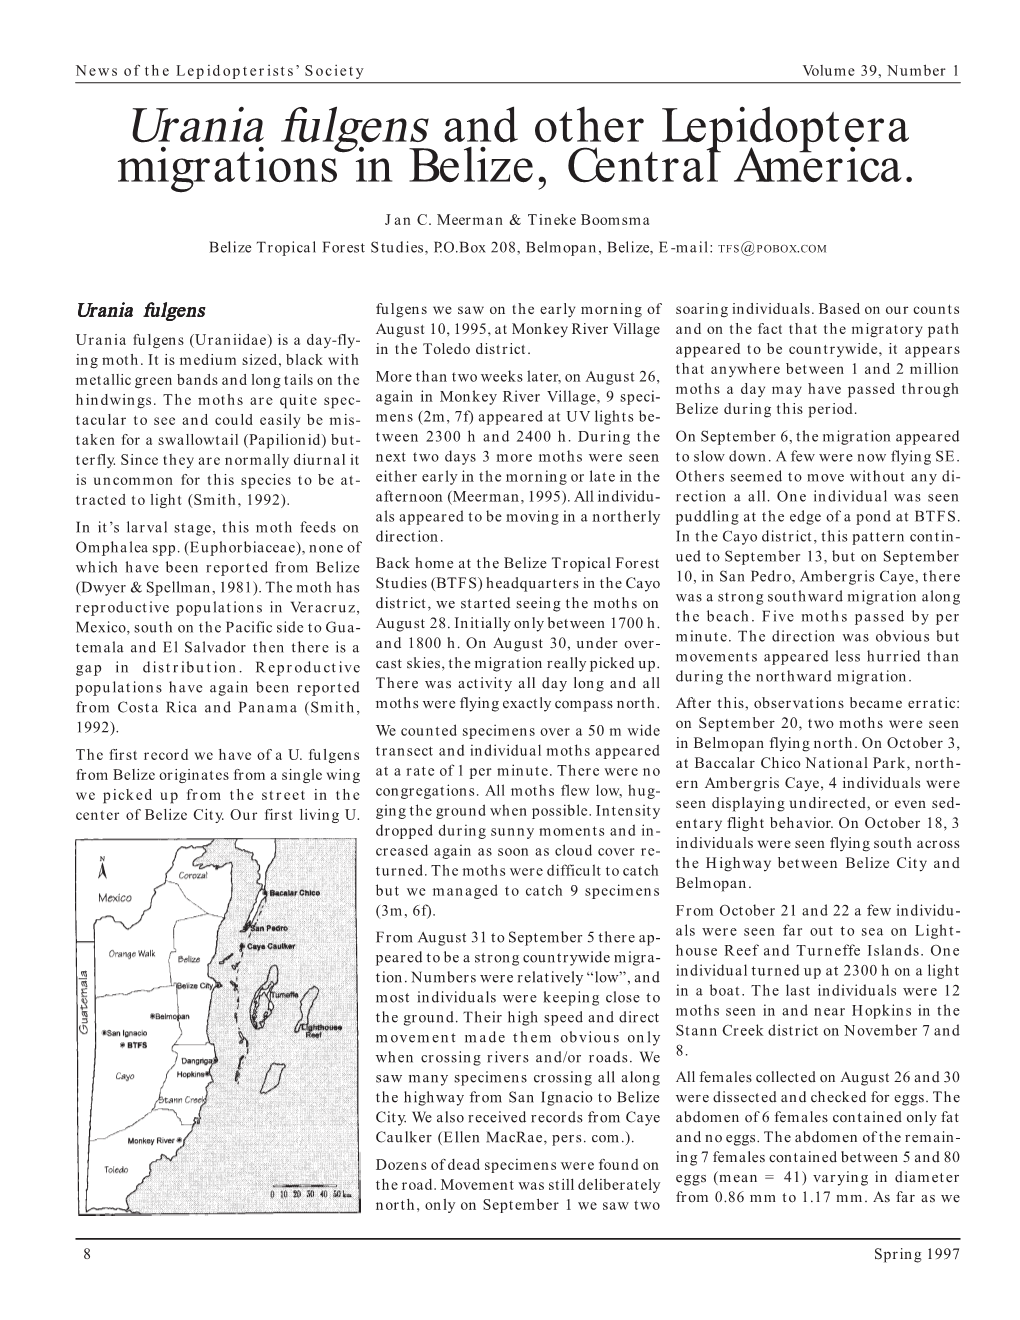 Urania Fulgens and Other Lepidoptera Migrations in Belize, Central America